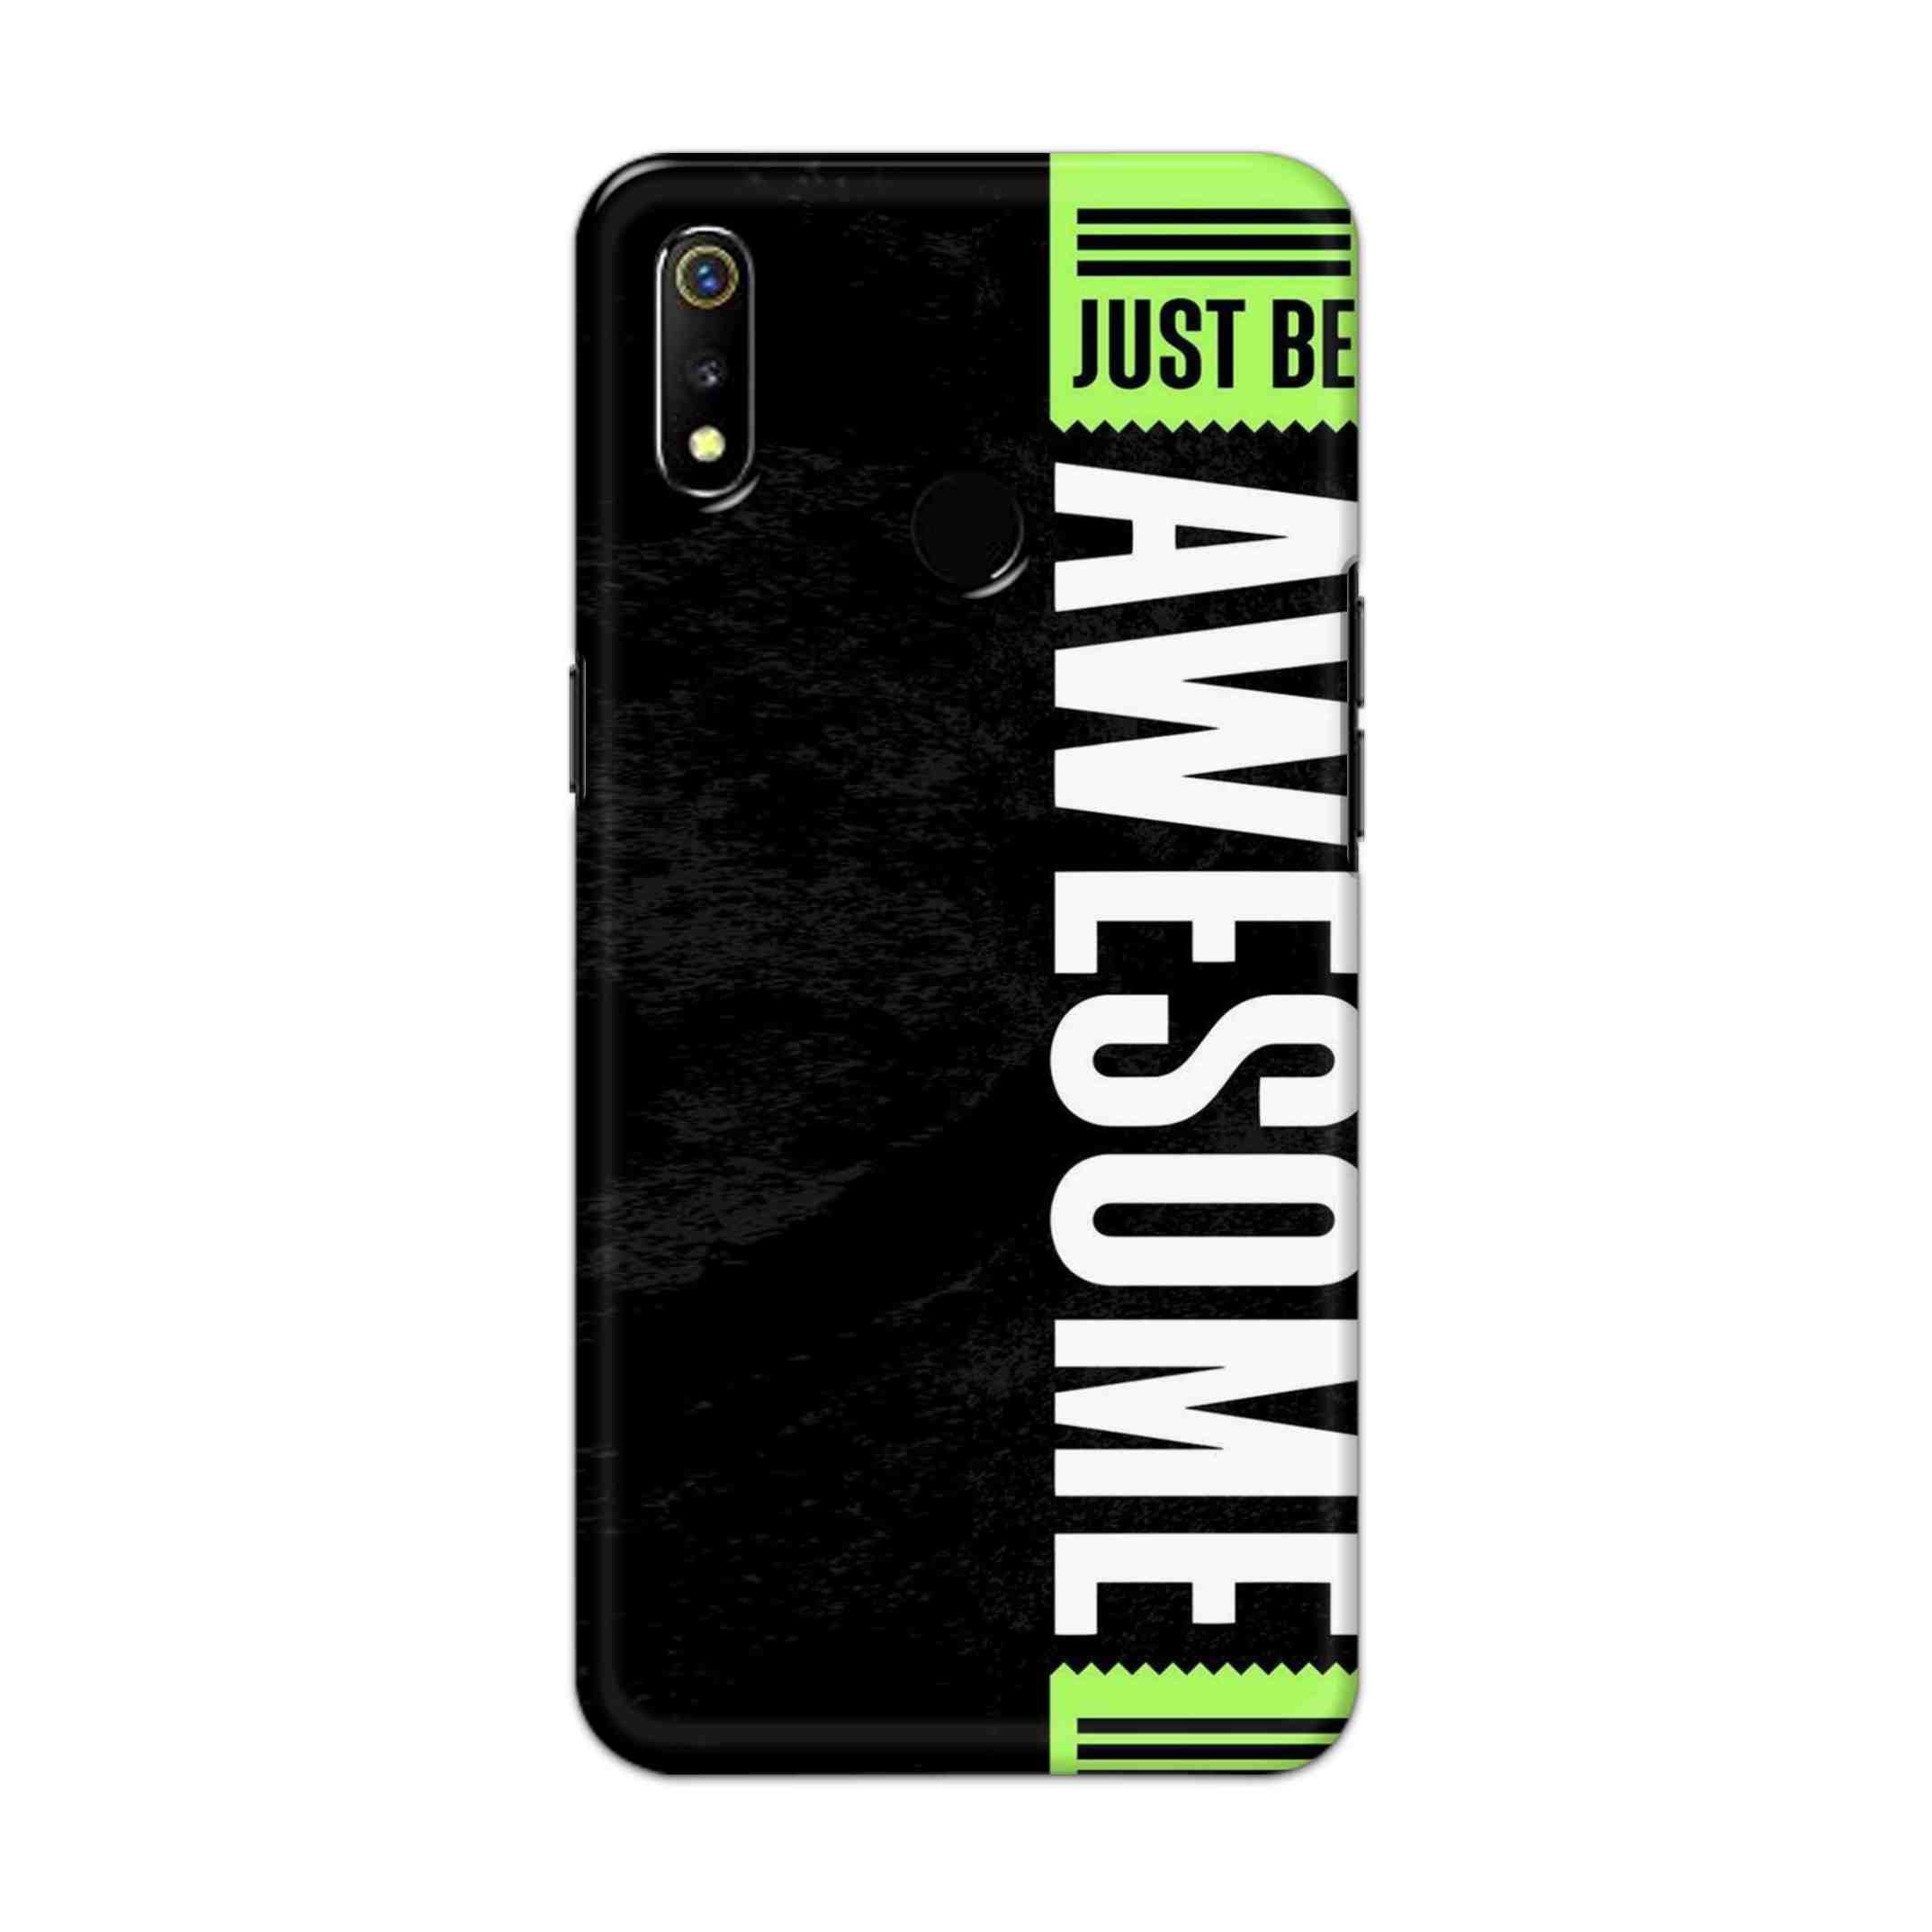 Buy Awesome Street Hard Back Mobile Phone Case Cover For Oppo Realme 3 Online